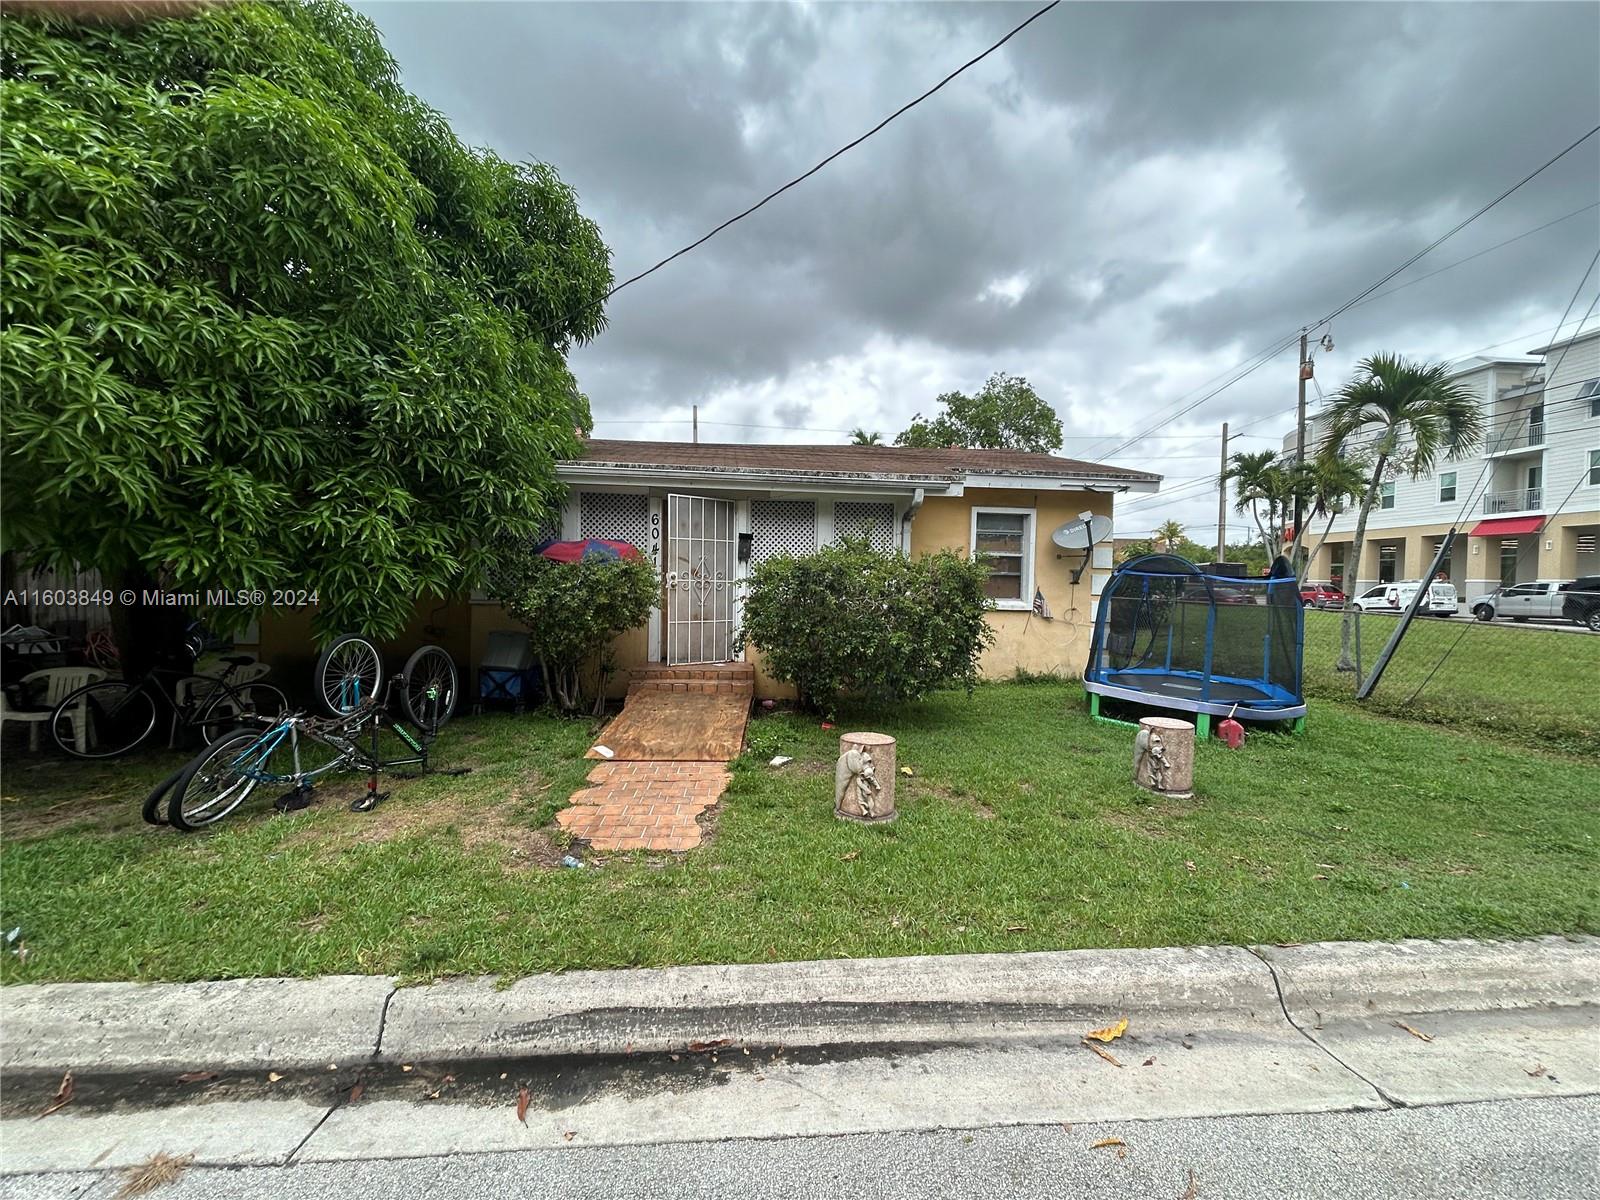 This corner lot in South Miami presents a unique opportunity for savvy investors and builders. Despite the need for significant work, its prime location near key landmarks and amenities promises a lucrative return on investment. Located close to University of Miami, US1, Hospitals, Coral Gables and lots more.